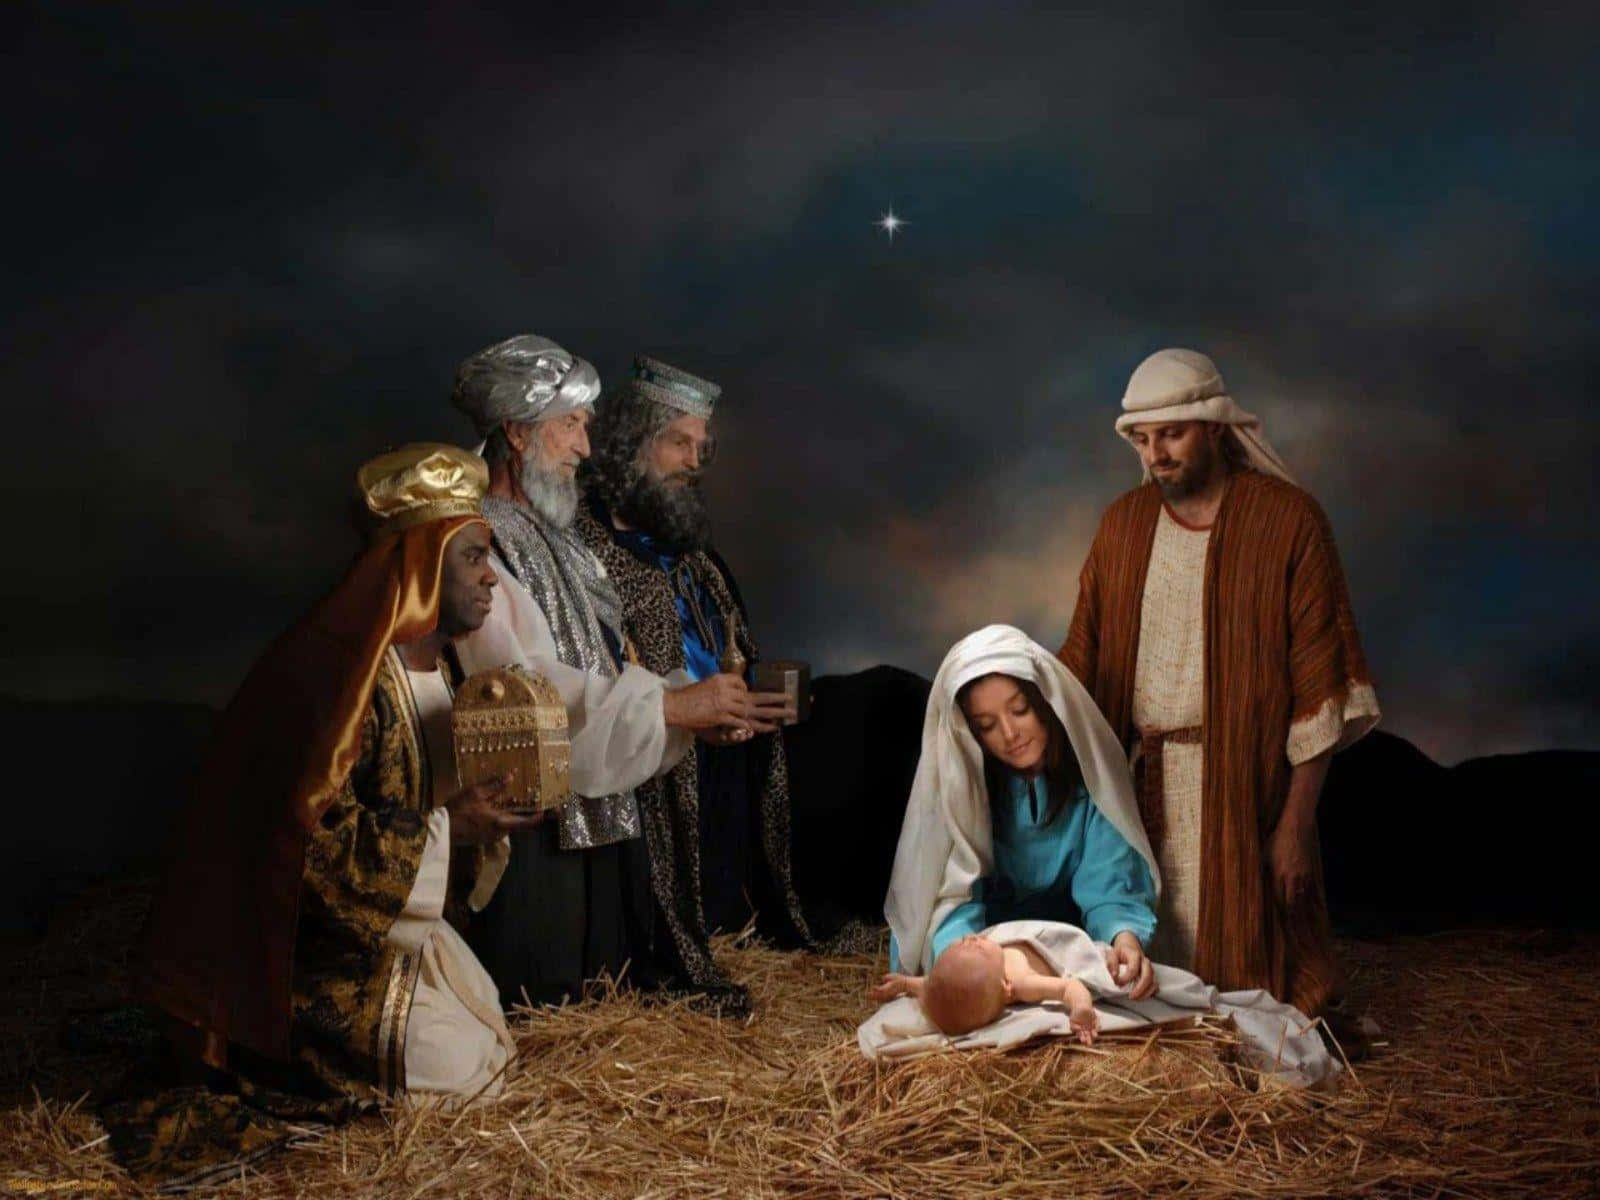 "The Nativity Scene: a scene to remind us of the birth of Jesus"